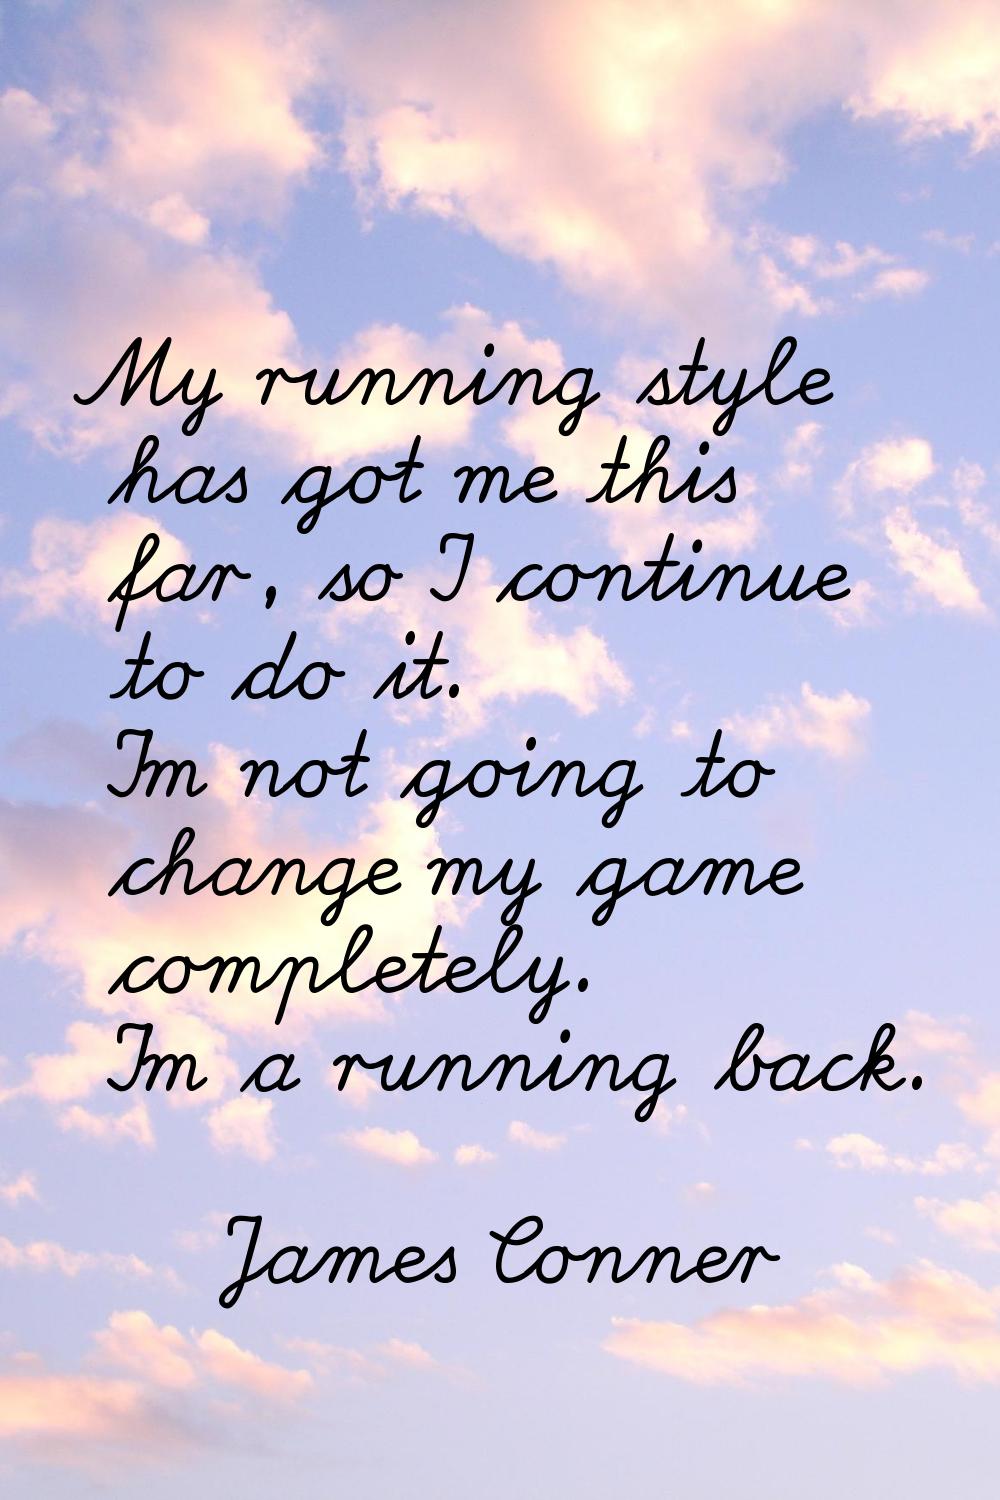 My running style has got me this far, so I continue to do it. I'm not going to change my game compl